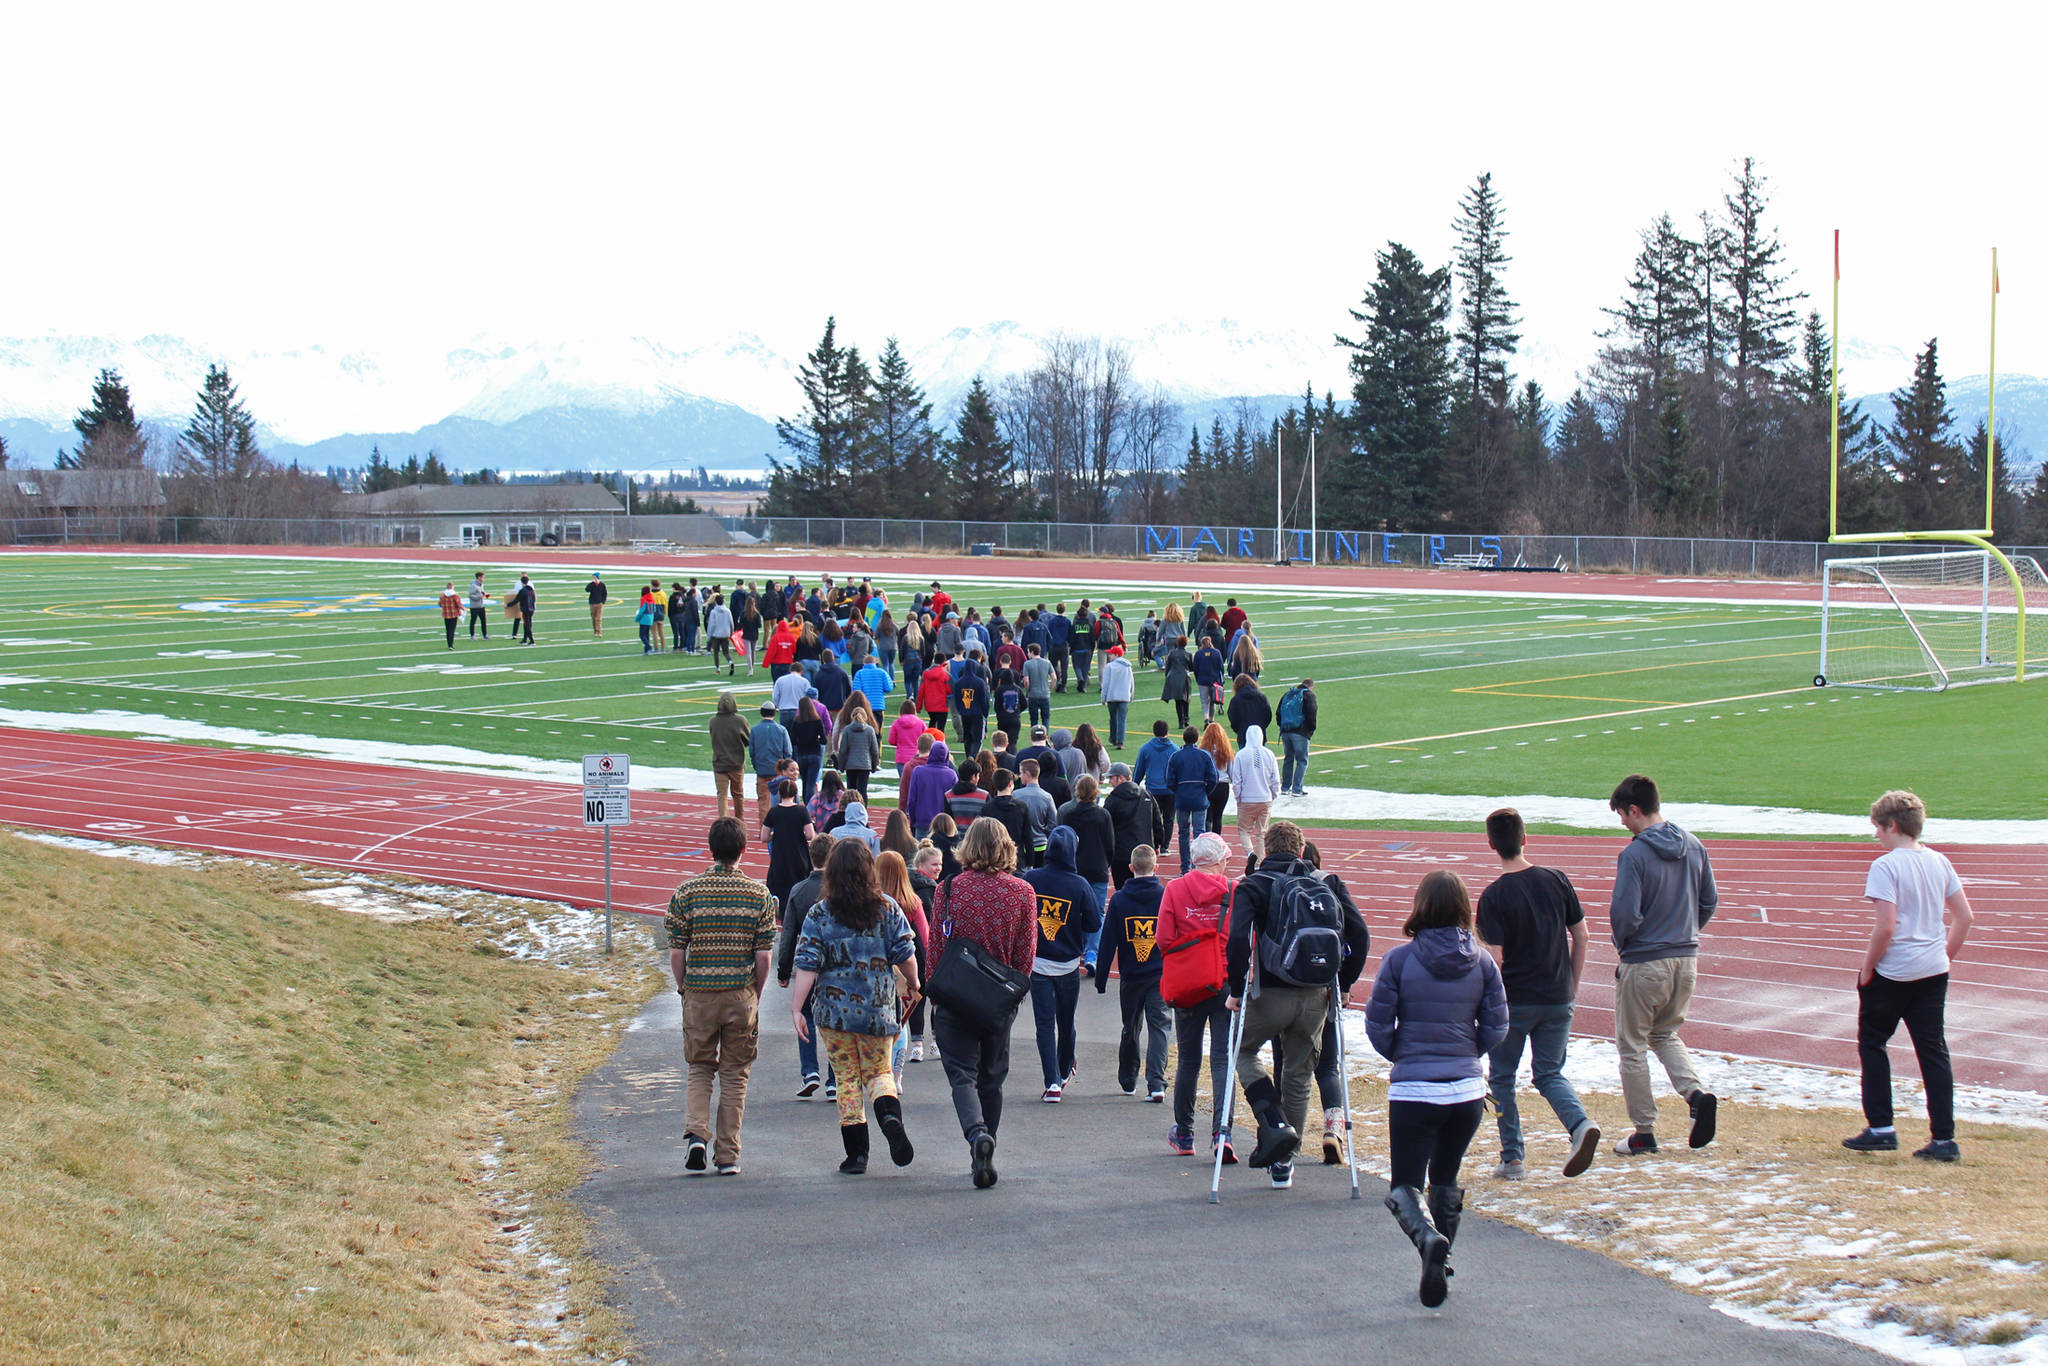 About 100 Homer High School students gather on the football field during a walkout staged Wednesday, Feb. 21, 2018 to protest for safer schools and honor the students killed in the Valentine’s Day mass shooting in Parkland, Florida. The students formed the number 17 with their bodies on the field. (Homer News file photo)